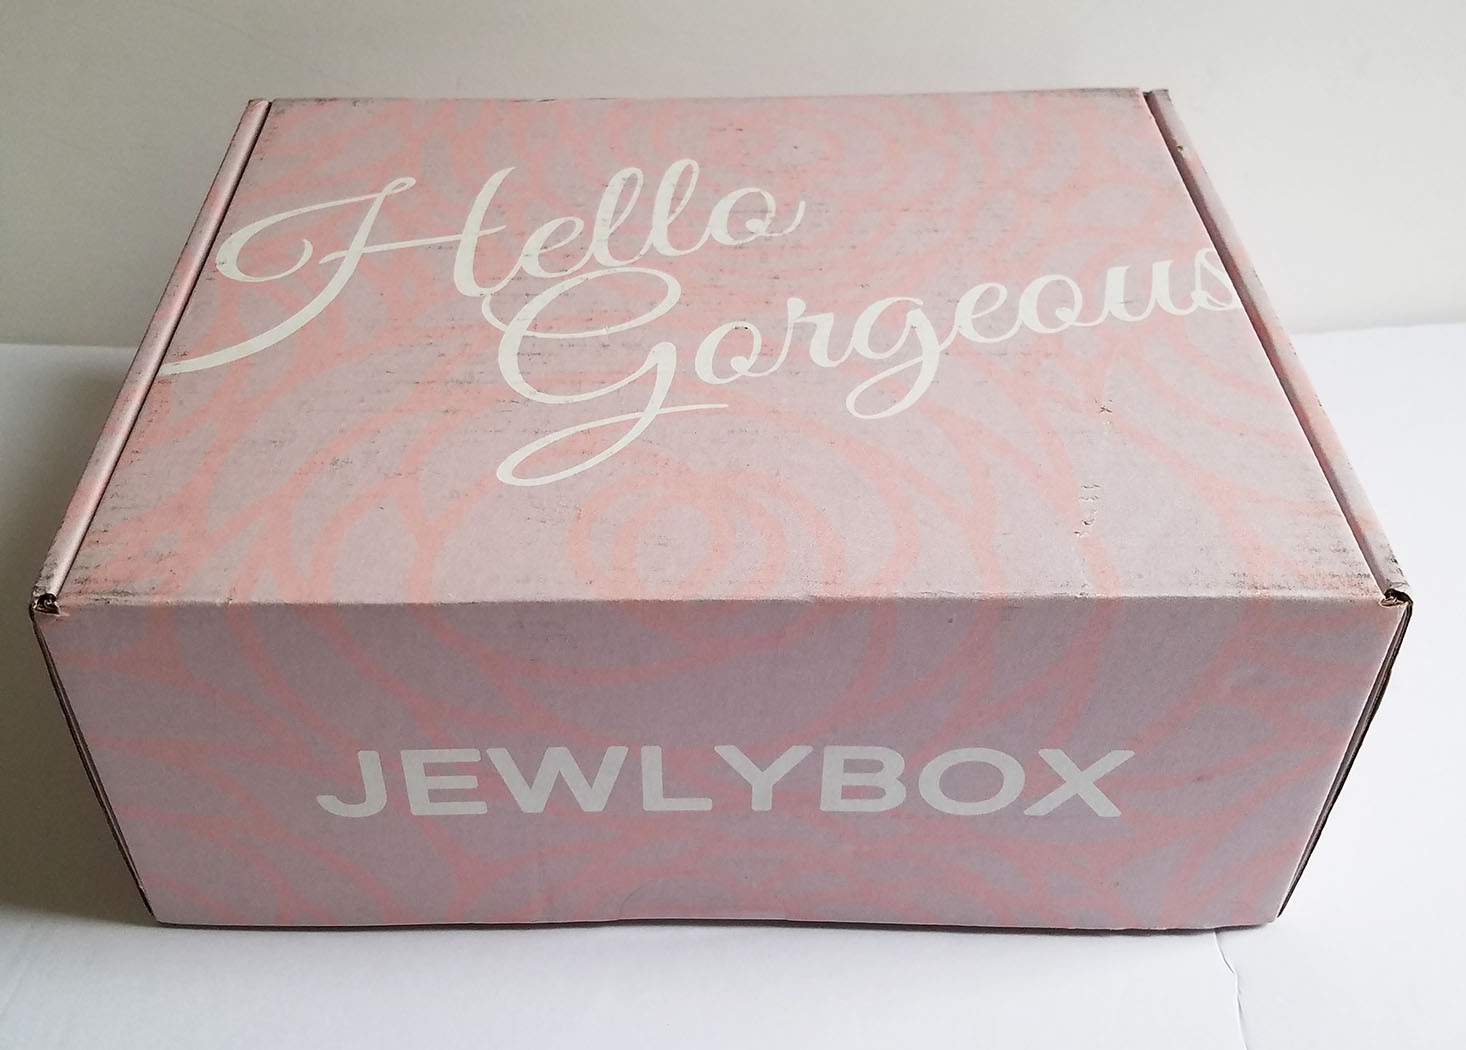 Jewlybox Jewelry Subscription Review + Coupon – May 2018